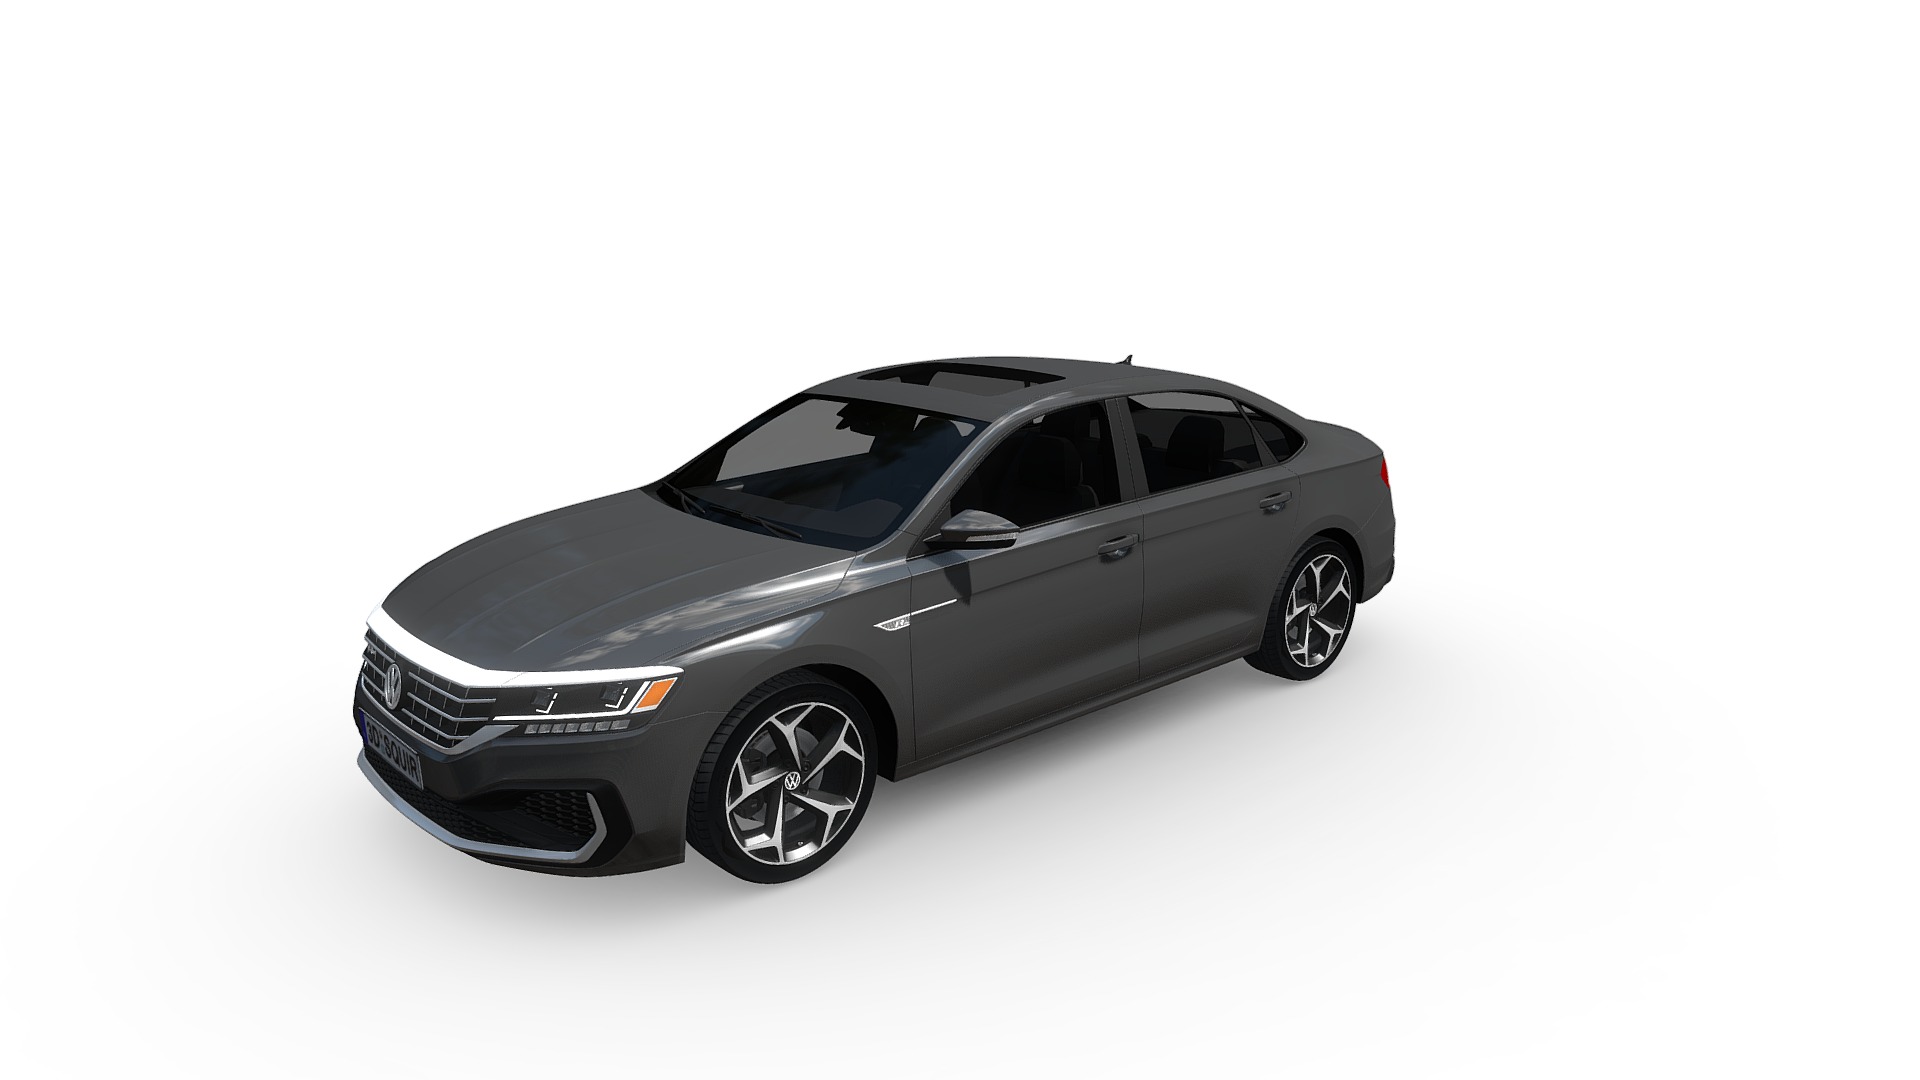 3D model Volkswagen Passat R-line 2020 - This is a 3D model of the Volkswagen Passat R-line 2020. The 3D model is about a silver car with a white background.